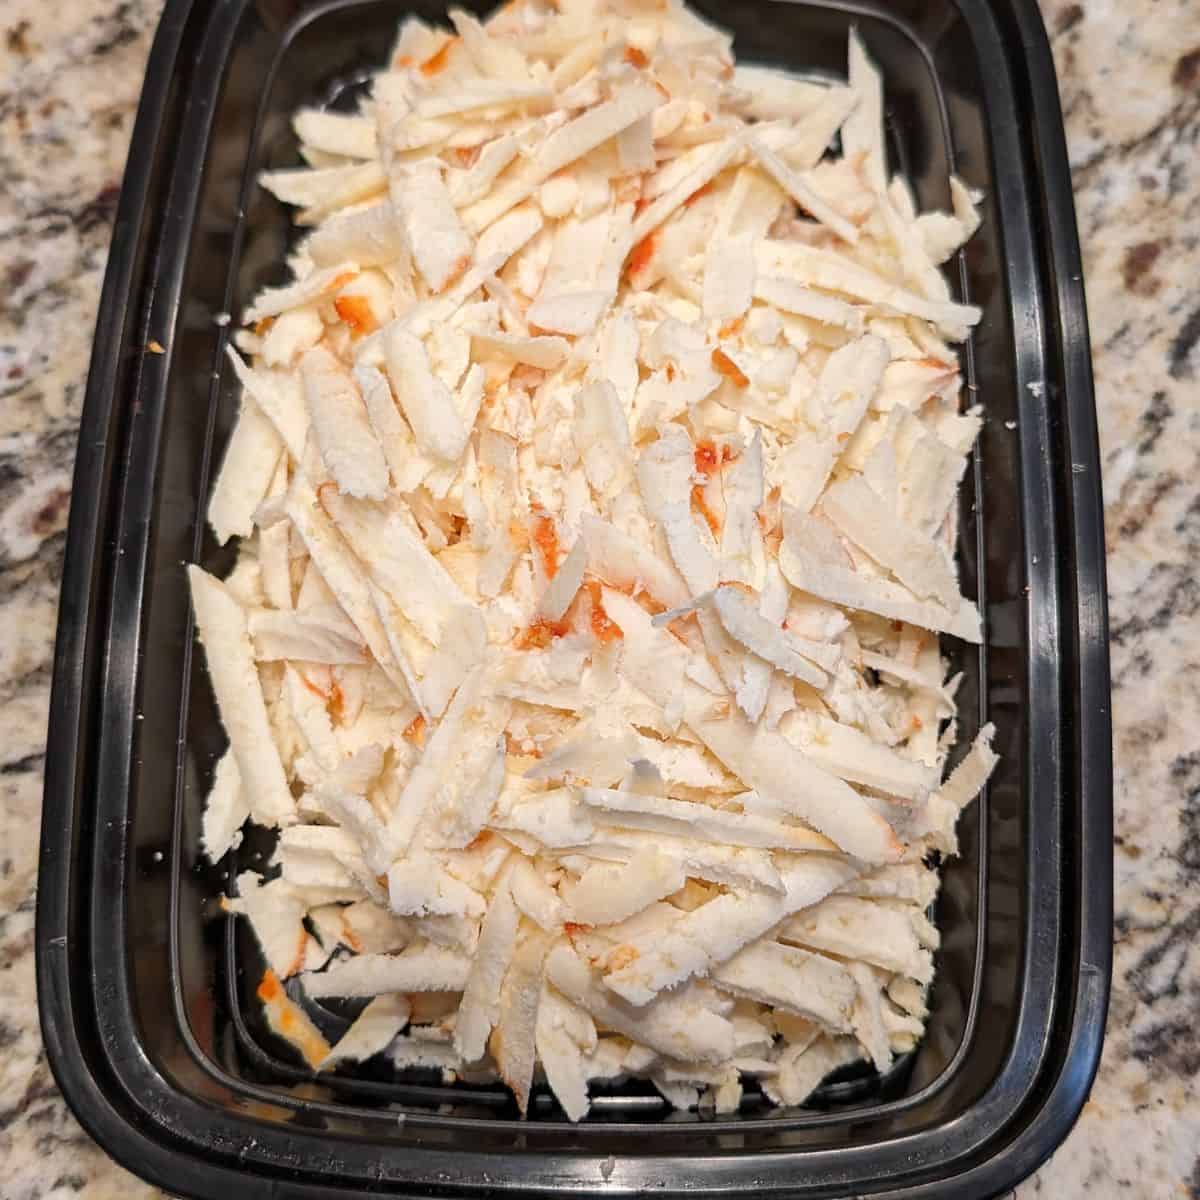 Shredded cheese in a black container.